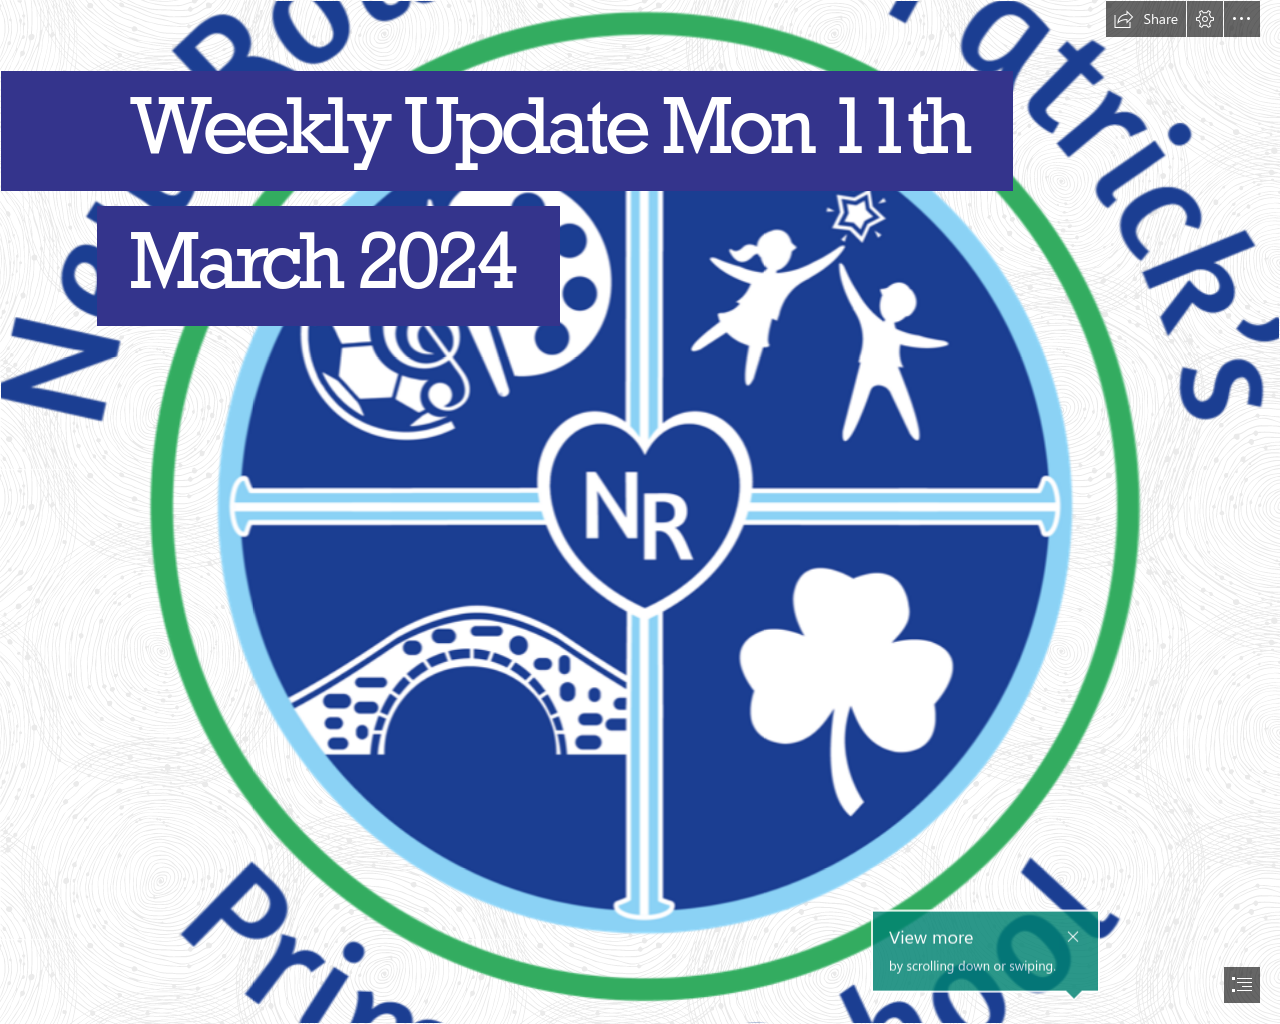 Weekly Update Monday 11th March 2024